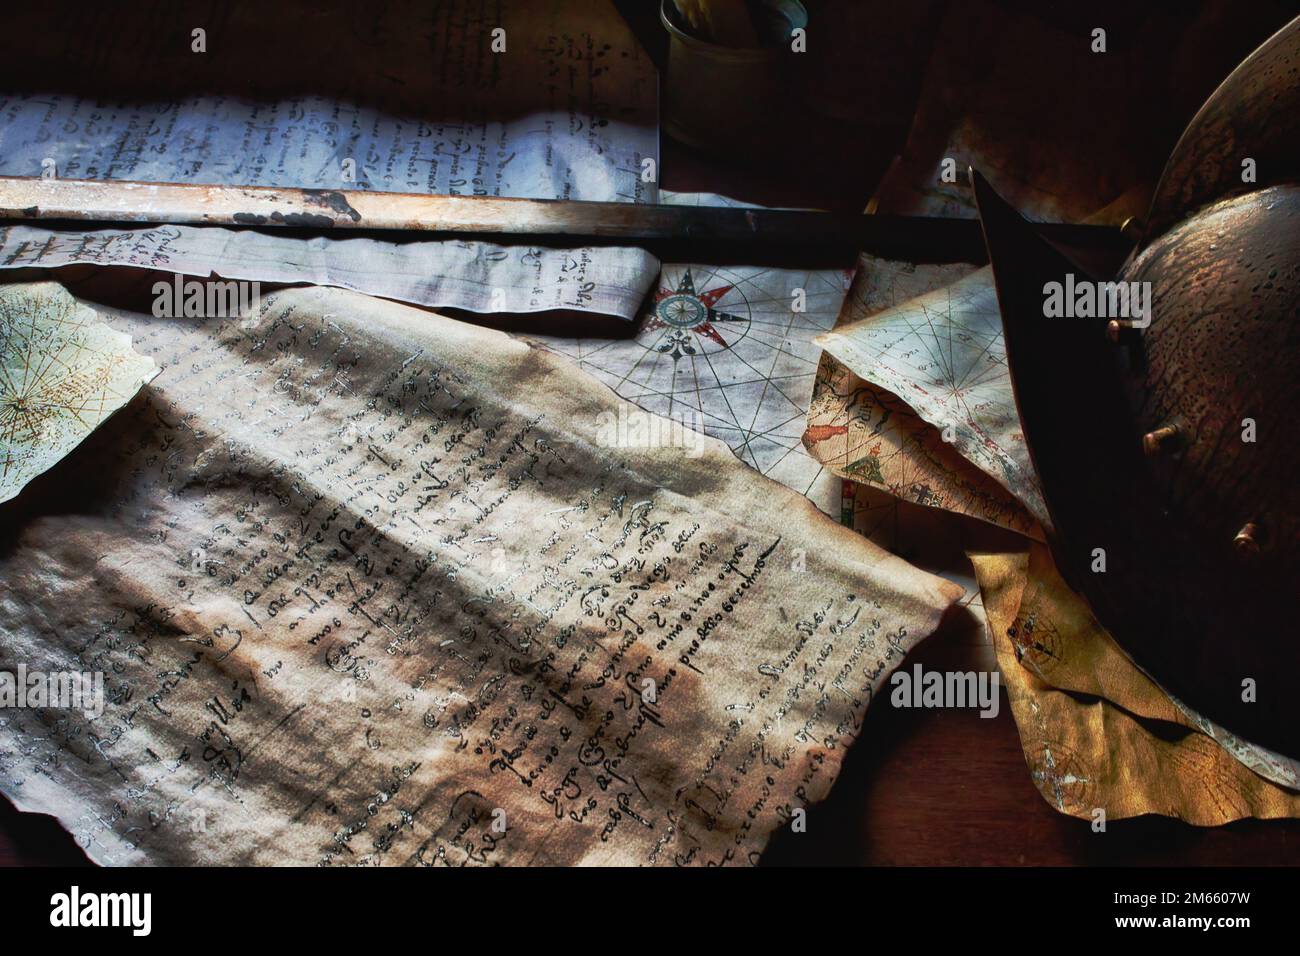 An old sword and helmet on the captain's table aboard a pirate ship, with old parchment maps and documents Stock Photo